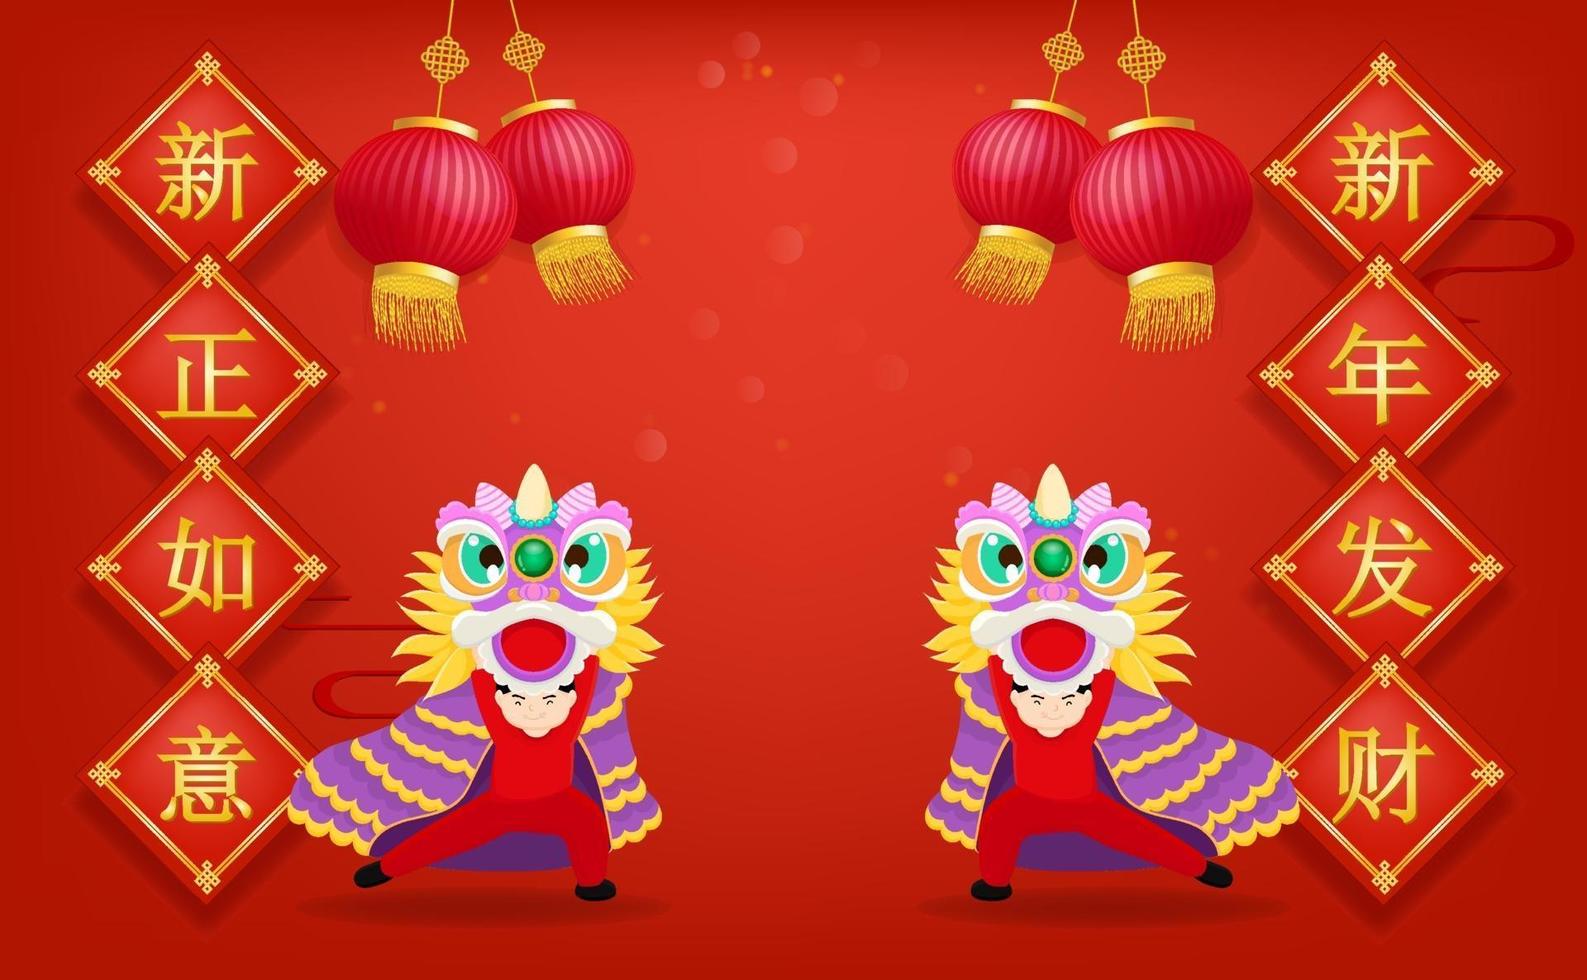 Happy Chinese new year with Chinese lion dancing and lantern on red background Chinese translation is New wishful wishes and a fortune in the new year vector